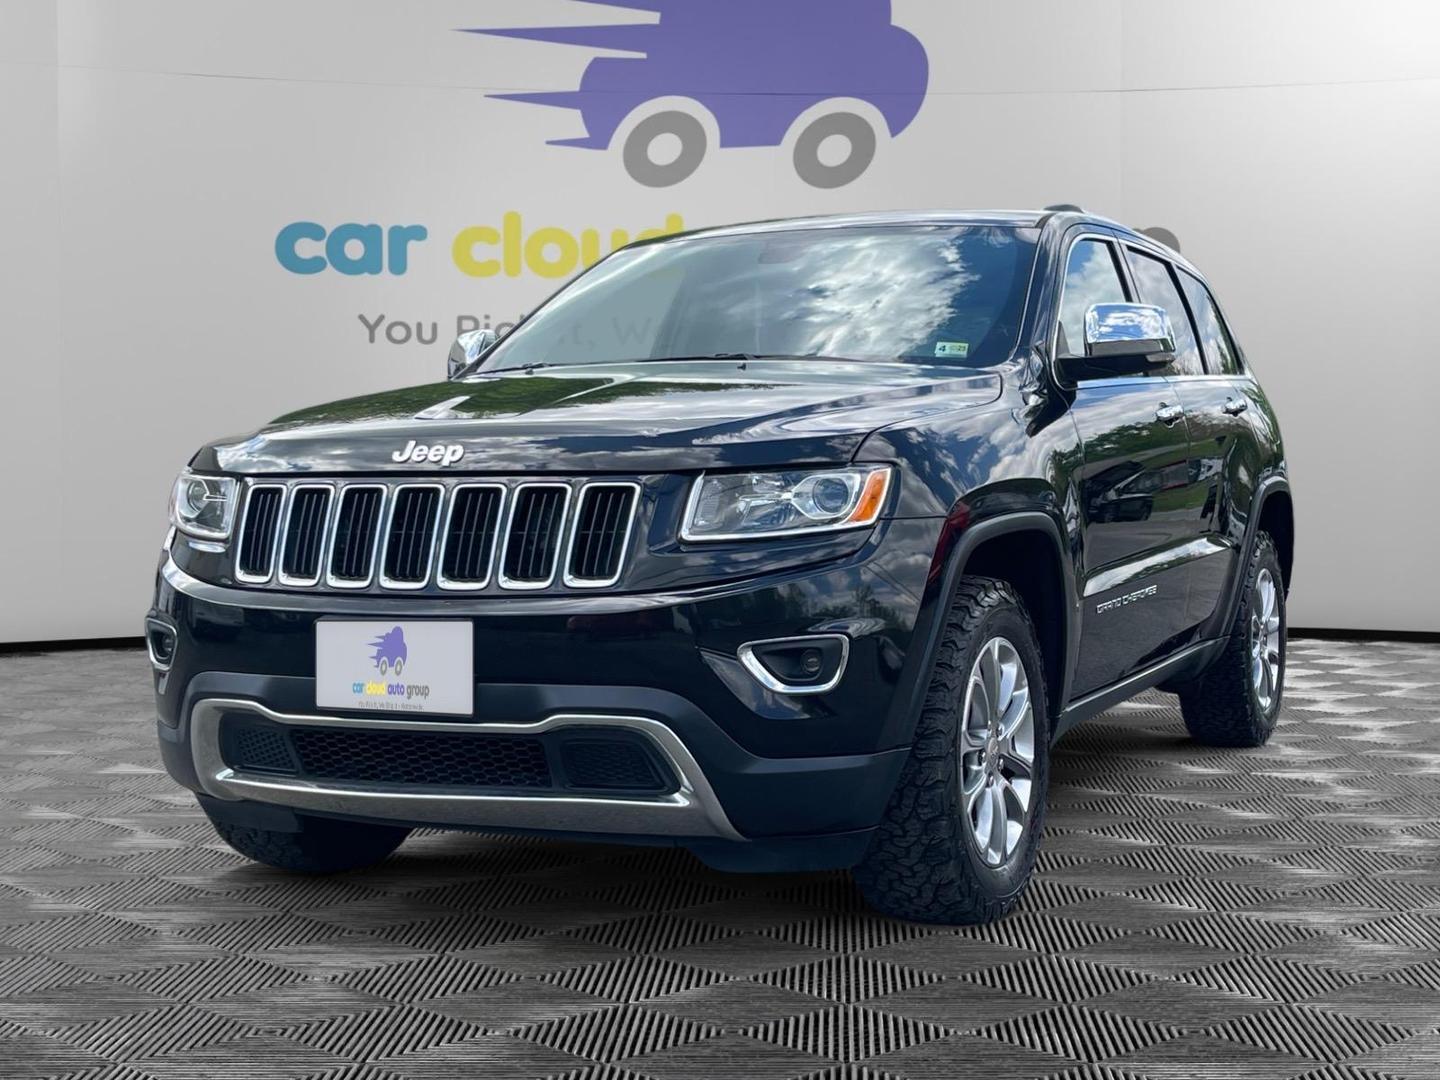 2015 Jeep Grand Cherokee Utility 4d Limited 4wd 3.0l V6 T-diesel - Image 1